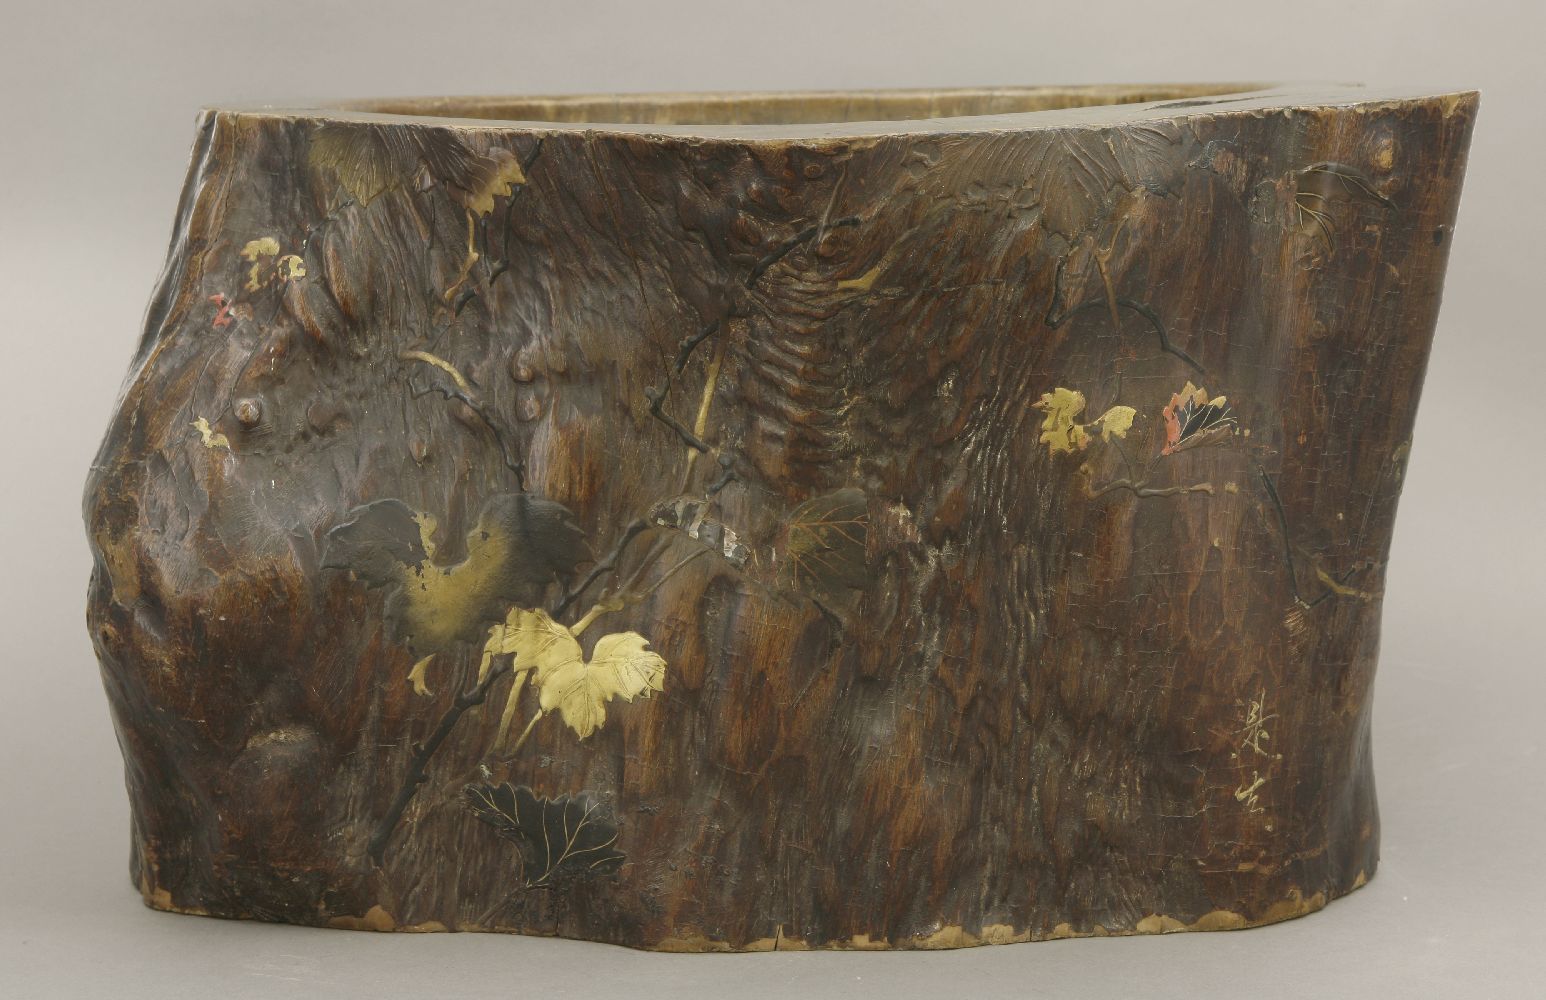 A lacquered wood Hibachi,Meiji period, decorated with leaves and branches in relief in gilt, red and